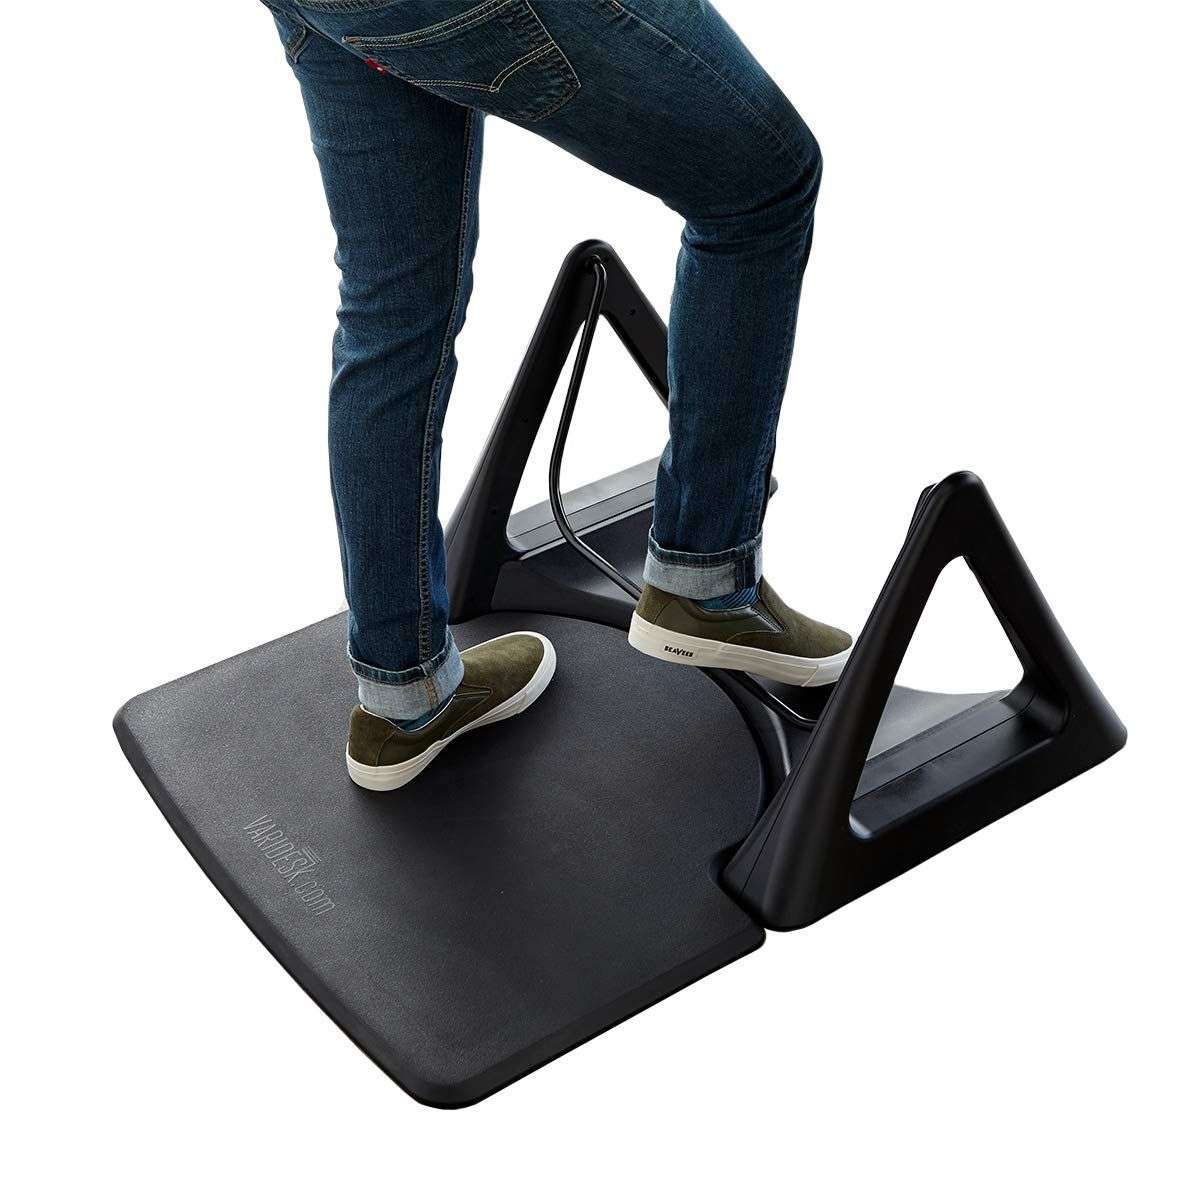 msitesdesign: Best Anti Fatigue Mat For Standing